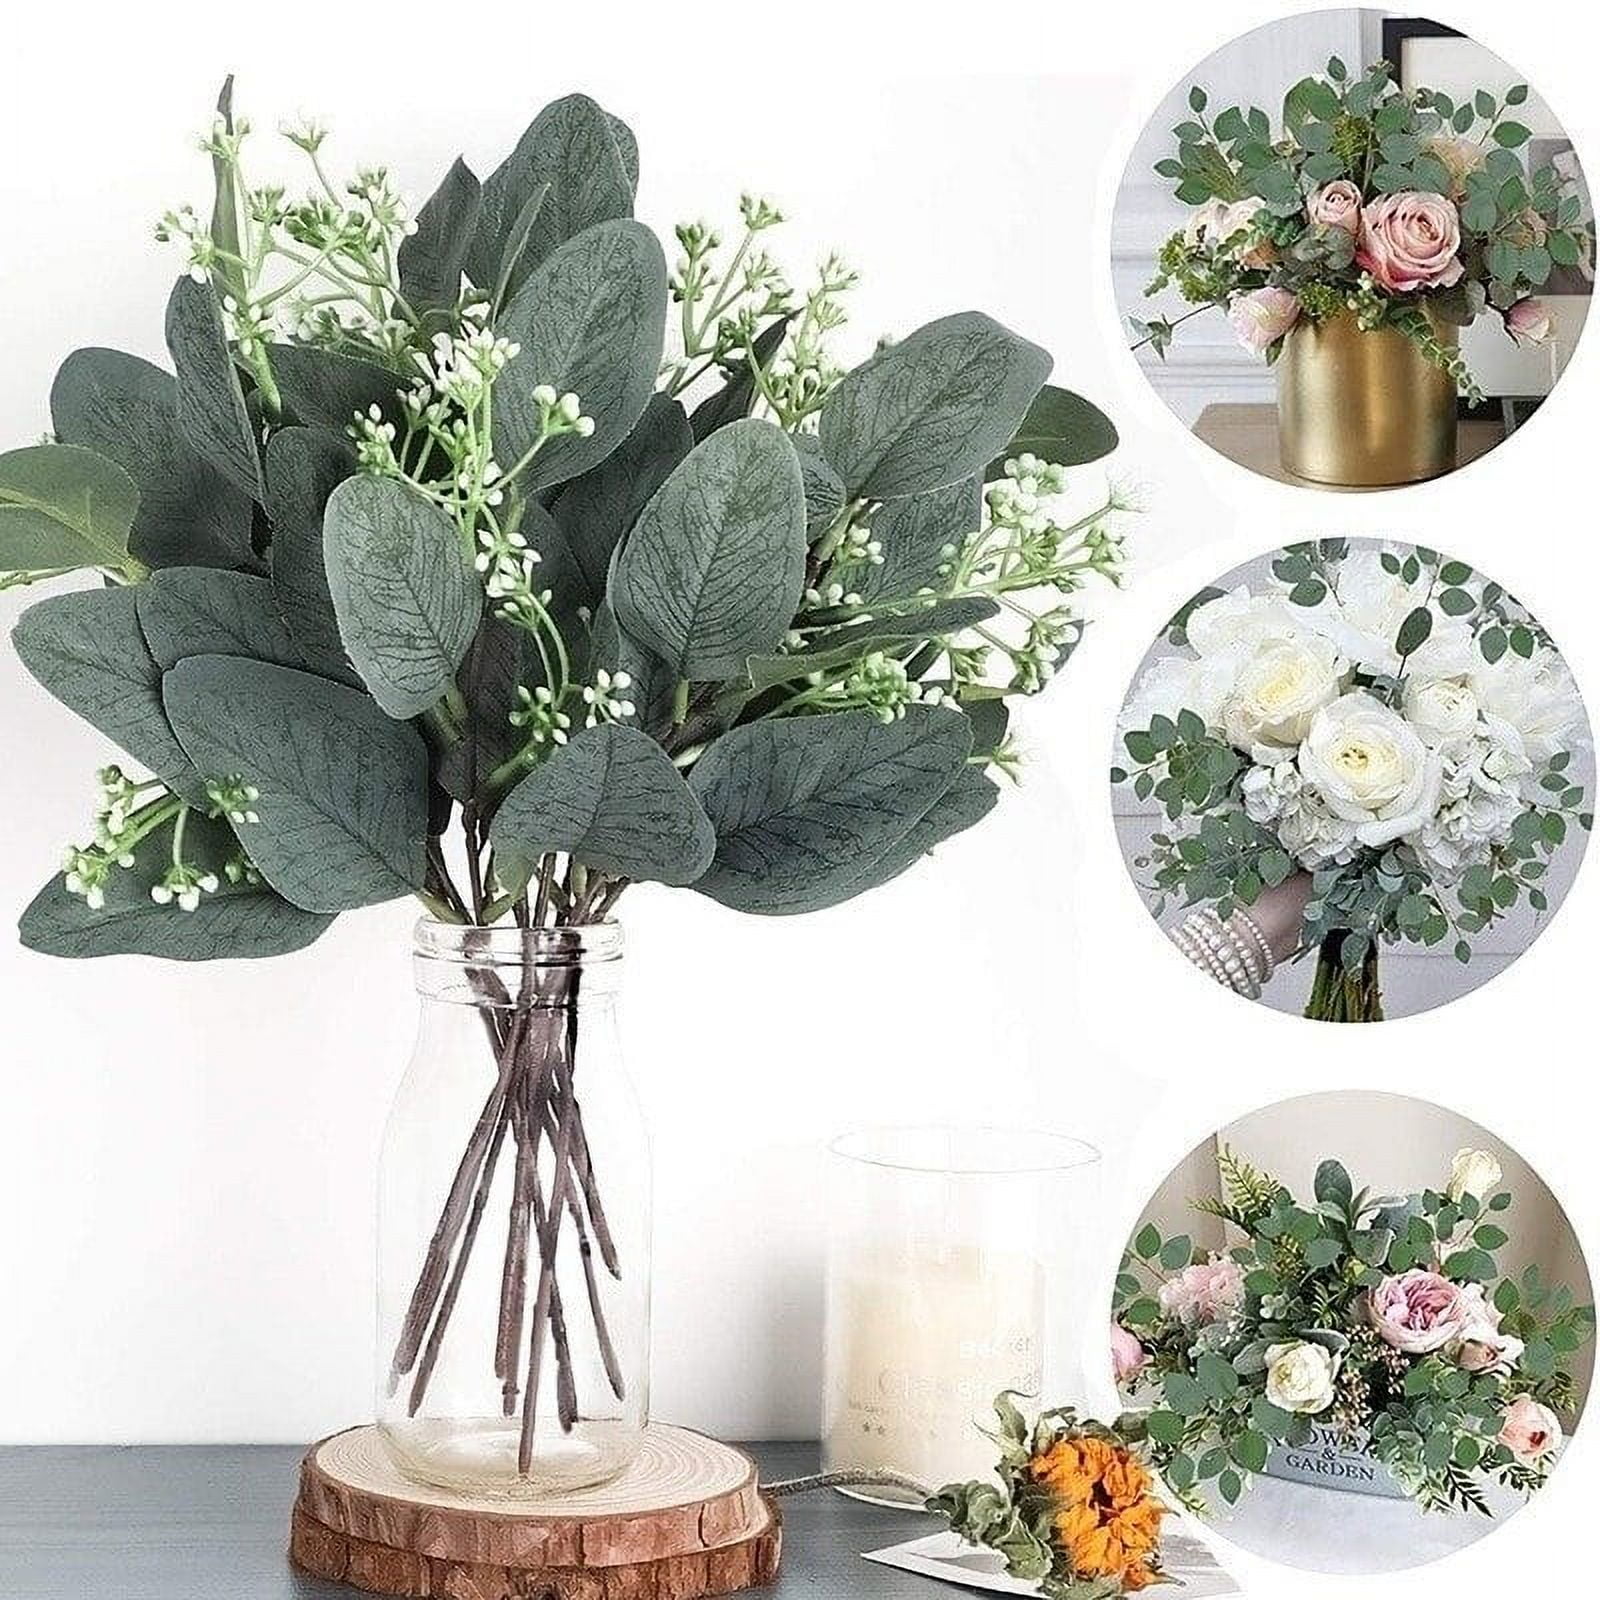 MISSPIN 26PCS Artificial Greenery Stems Set, Faux Greenery Branches with 7  Kinds of Greenery Leaves for Wedding Bouquet Table Centerpieces